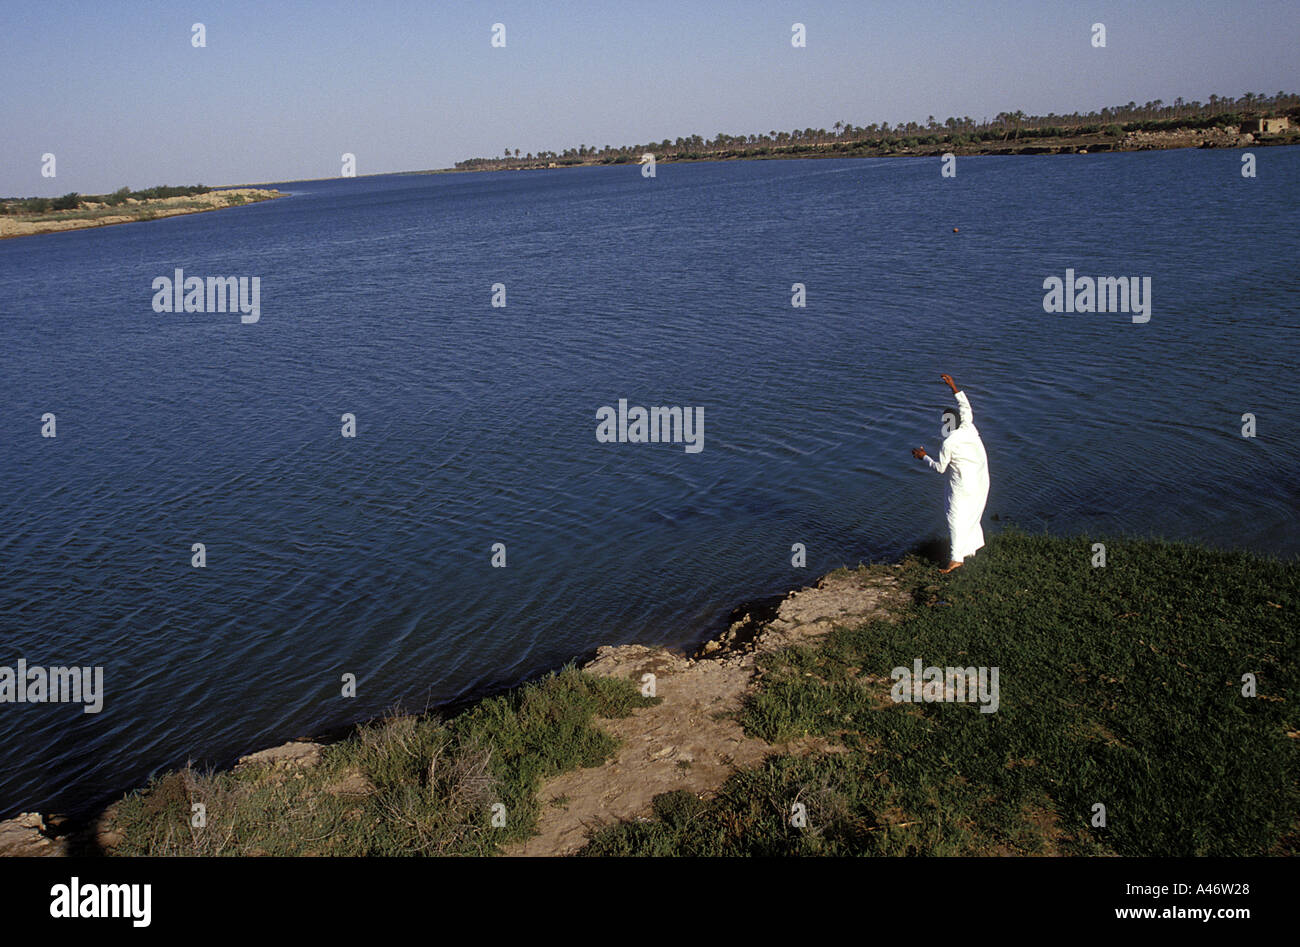 An Iraqi man fishes with a line at the confluence between the Tigris and Euphrates rivers called Al-Qurnah (Qurna) Basra, Iraq Stock Photo